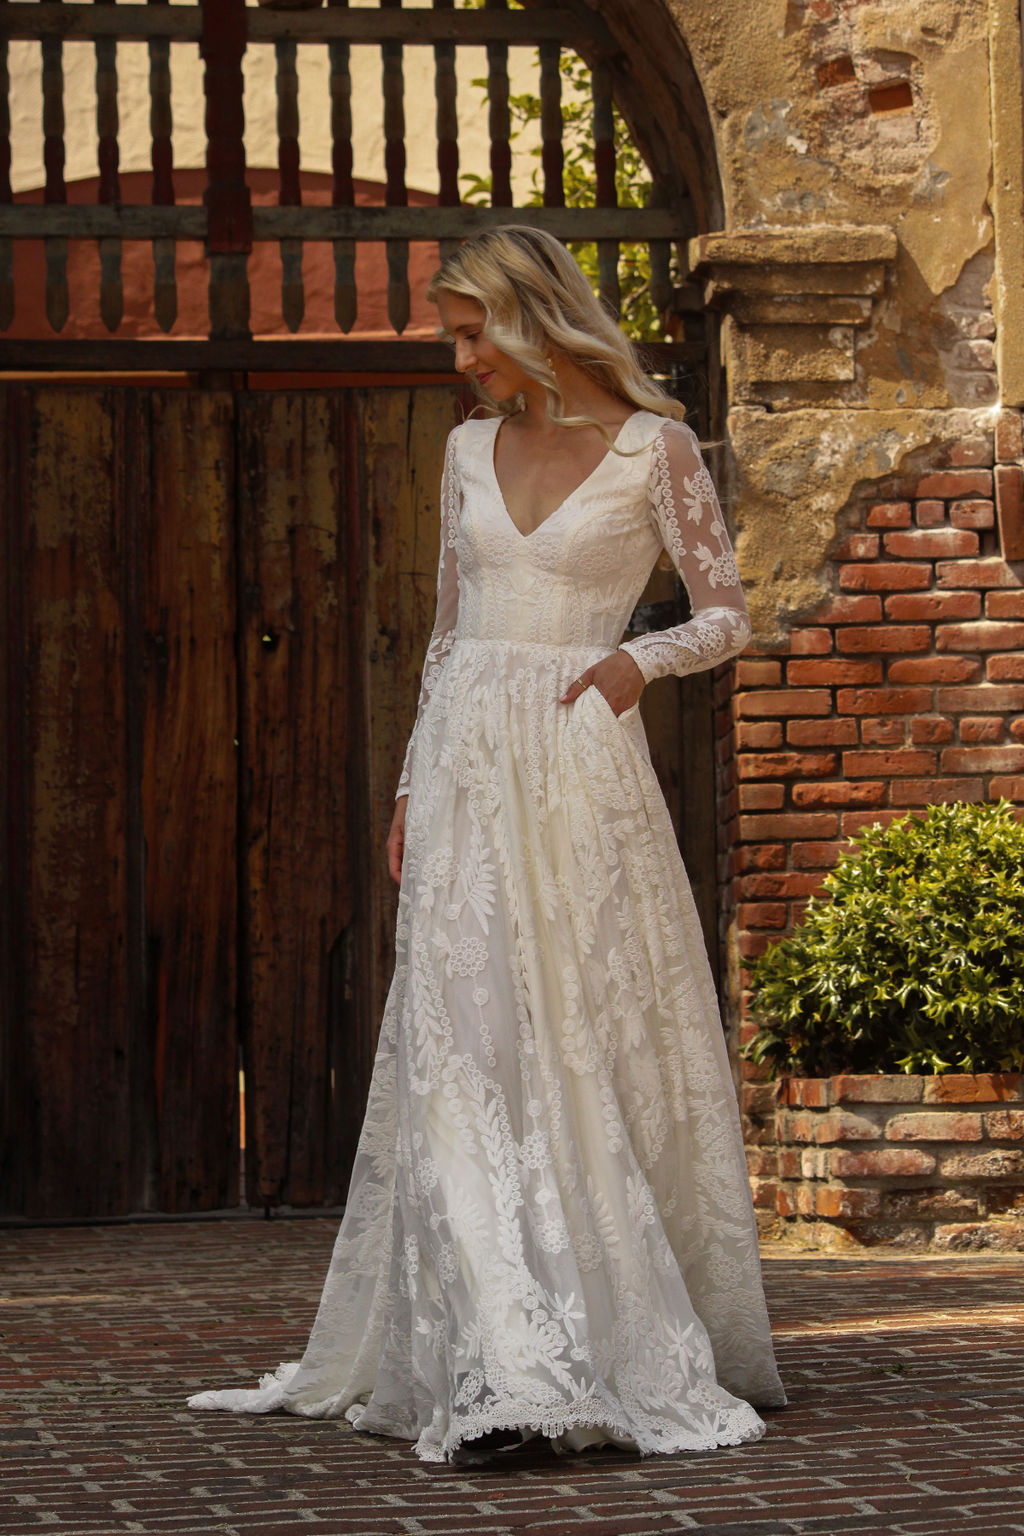 Discover-the-River-lace-wedding-dress-fitted-sleeves-open-back-and-flowy-skirt